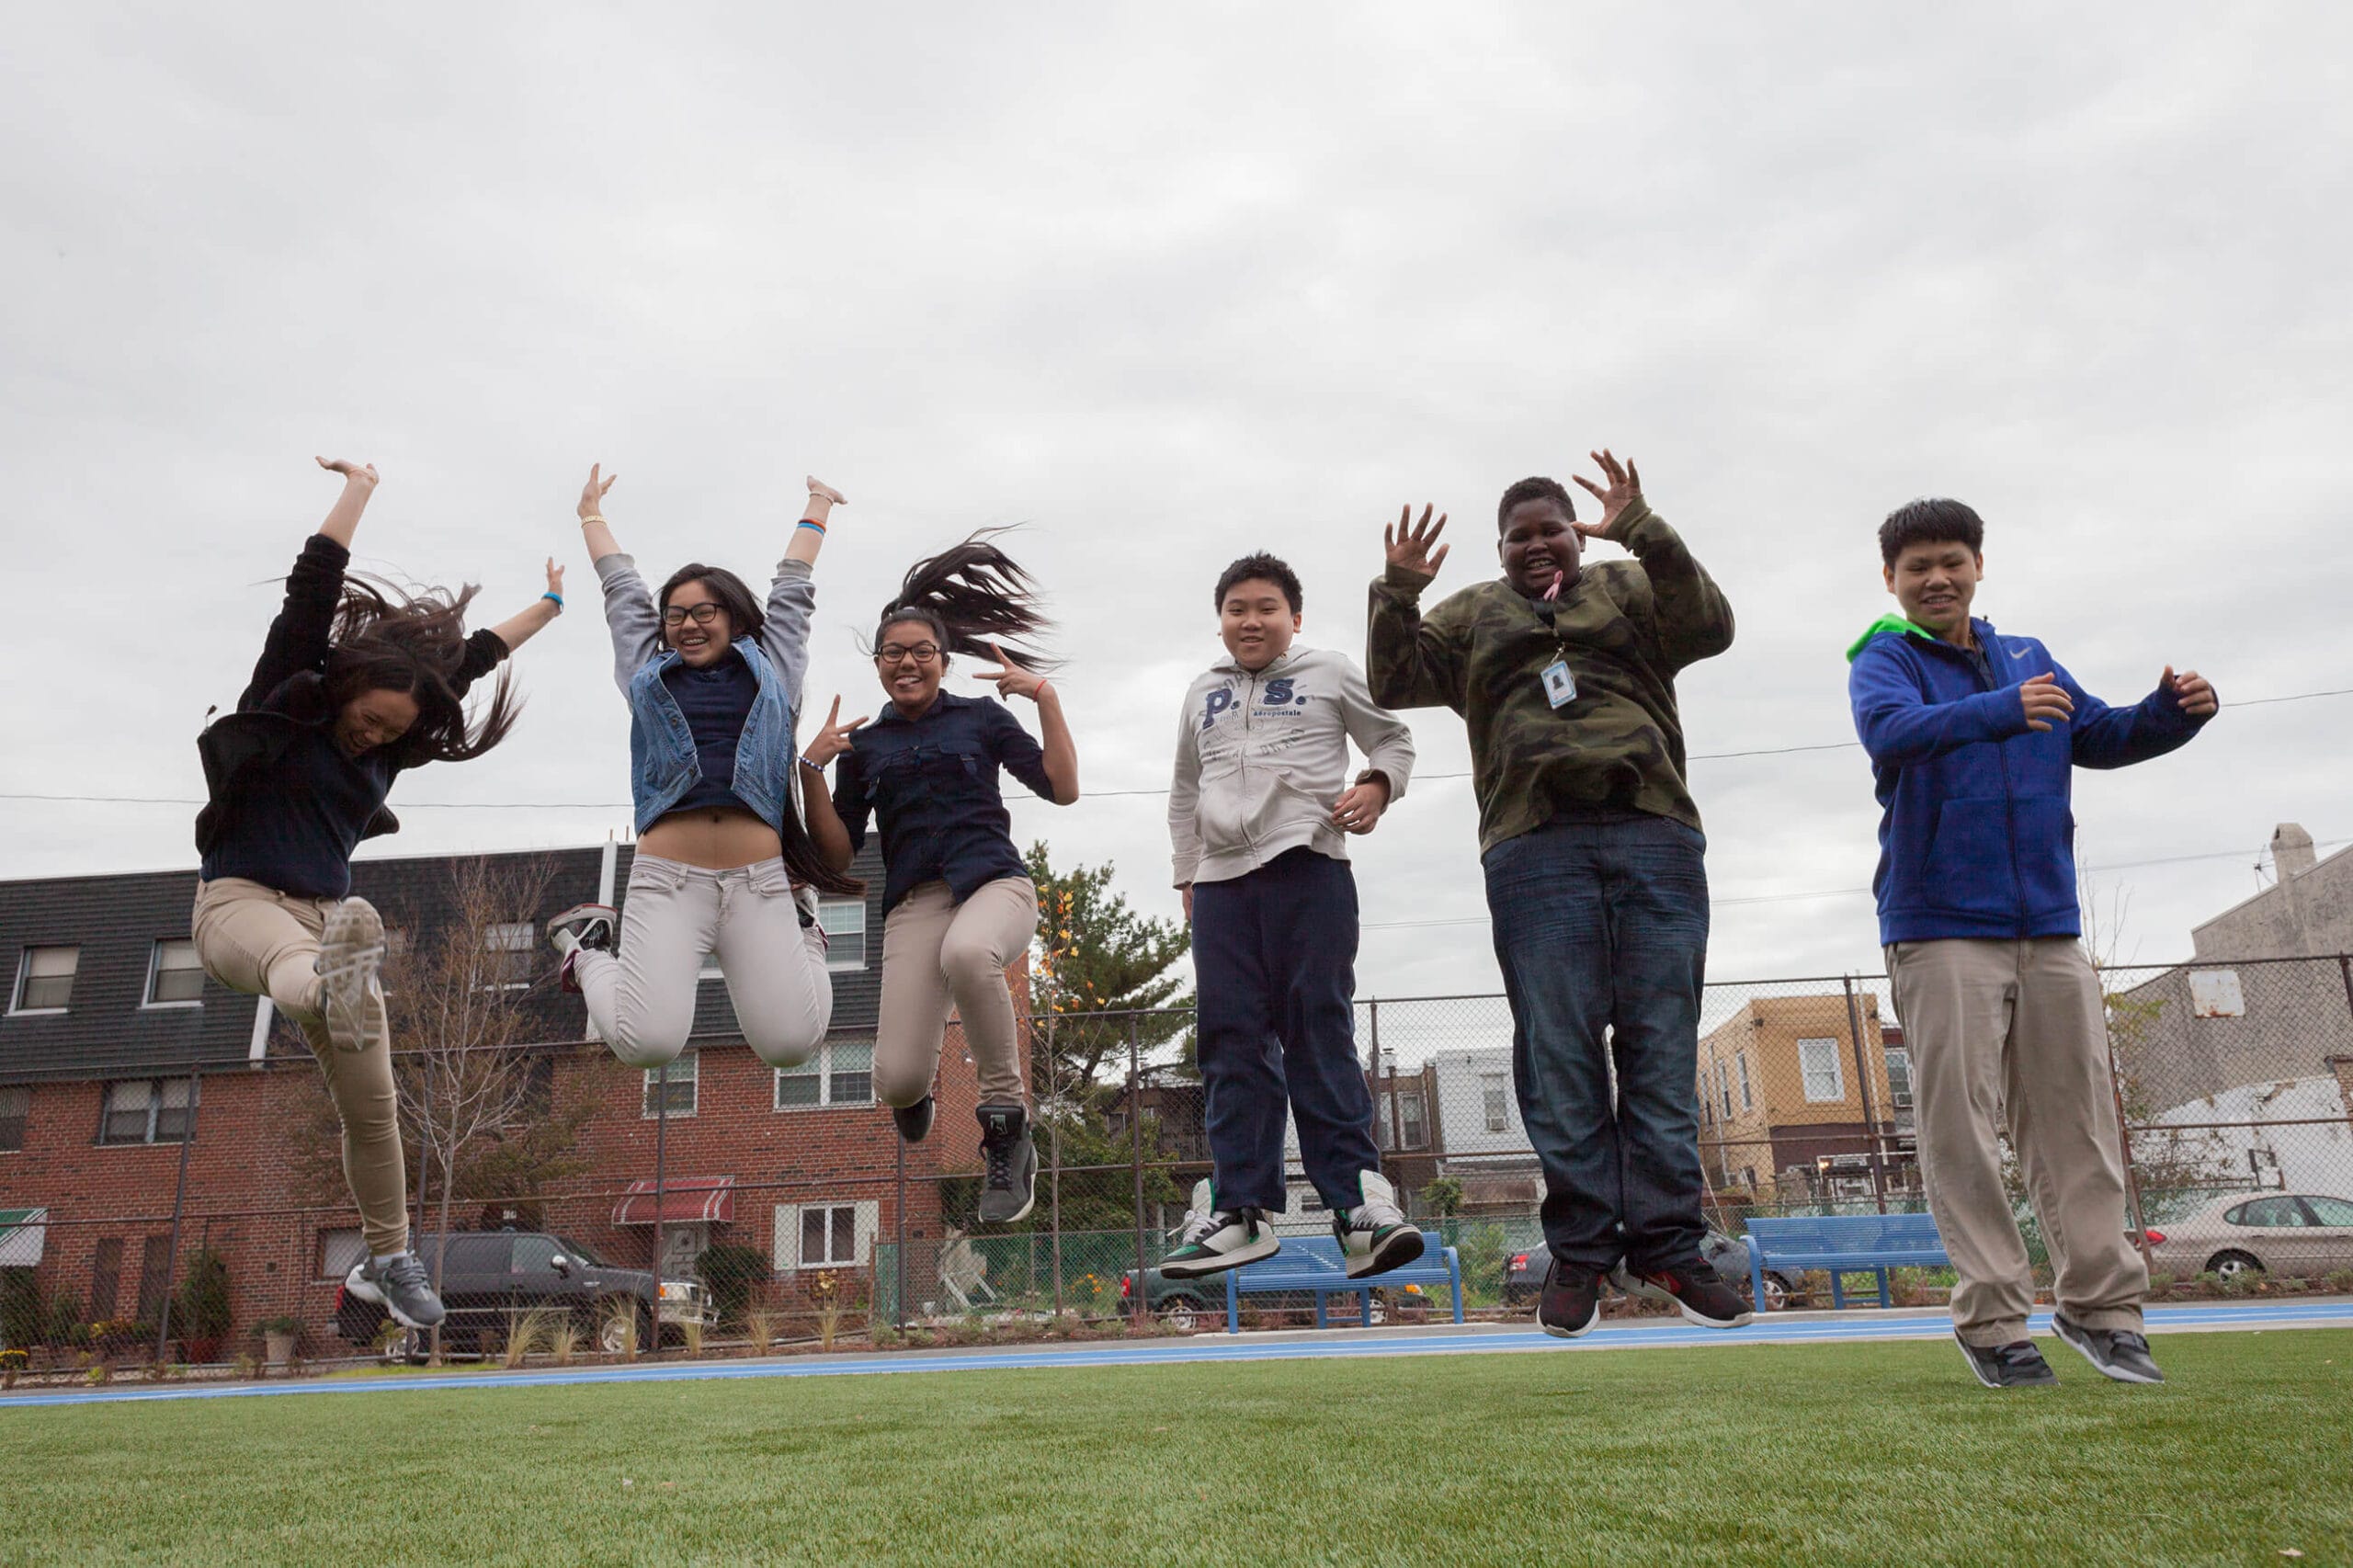 A group of people jumping in the air.